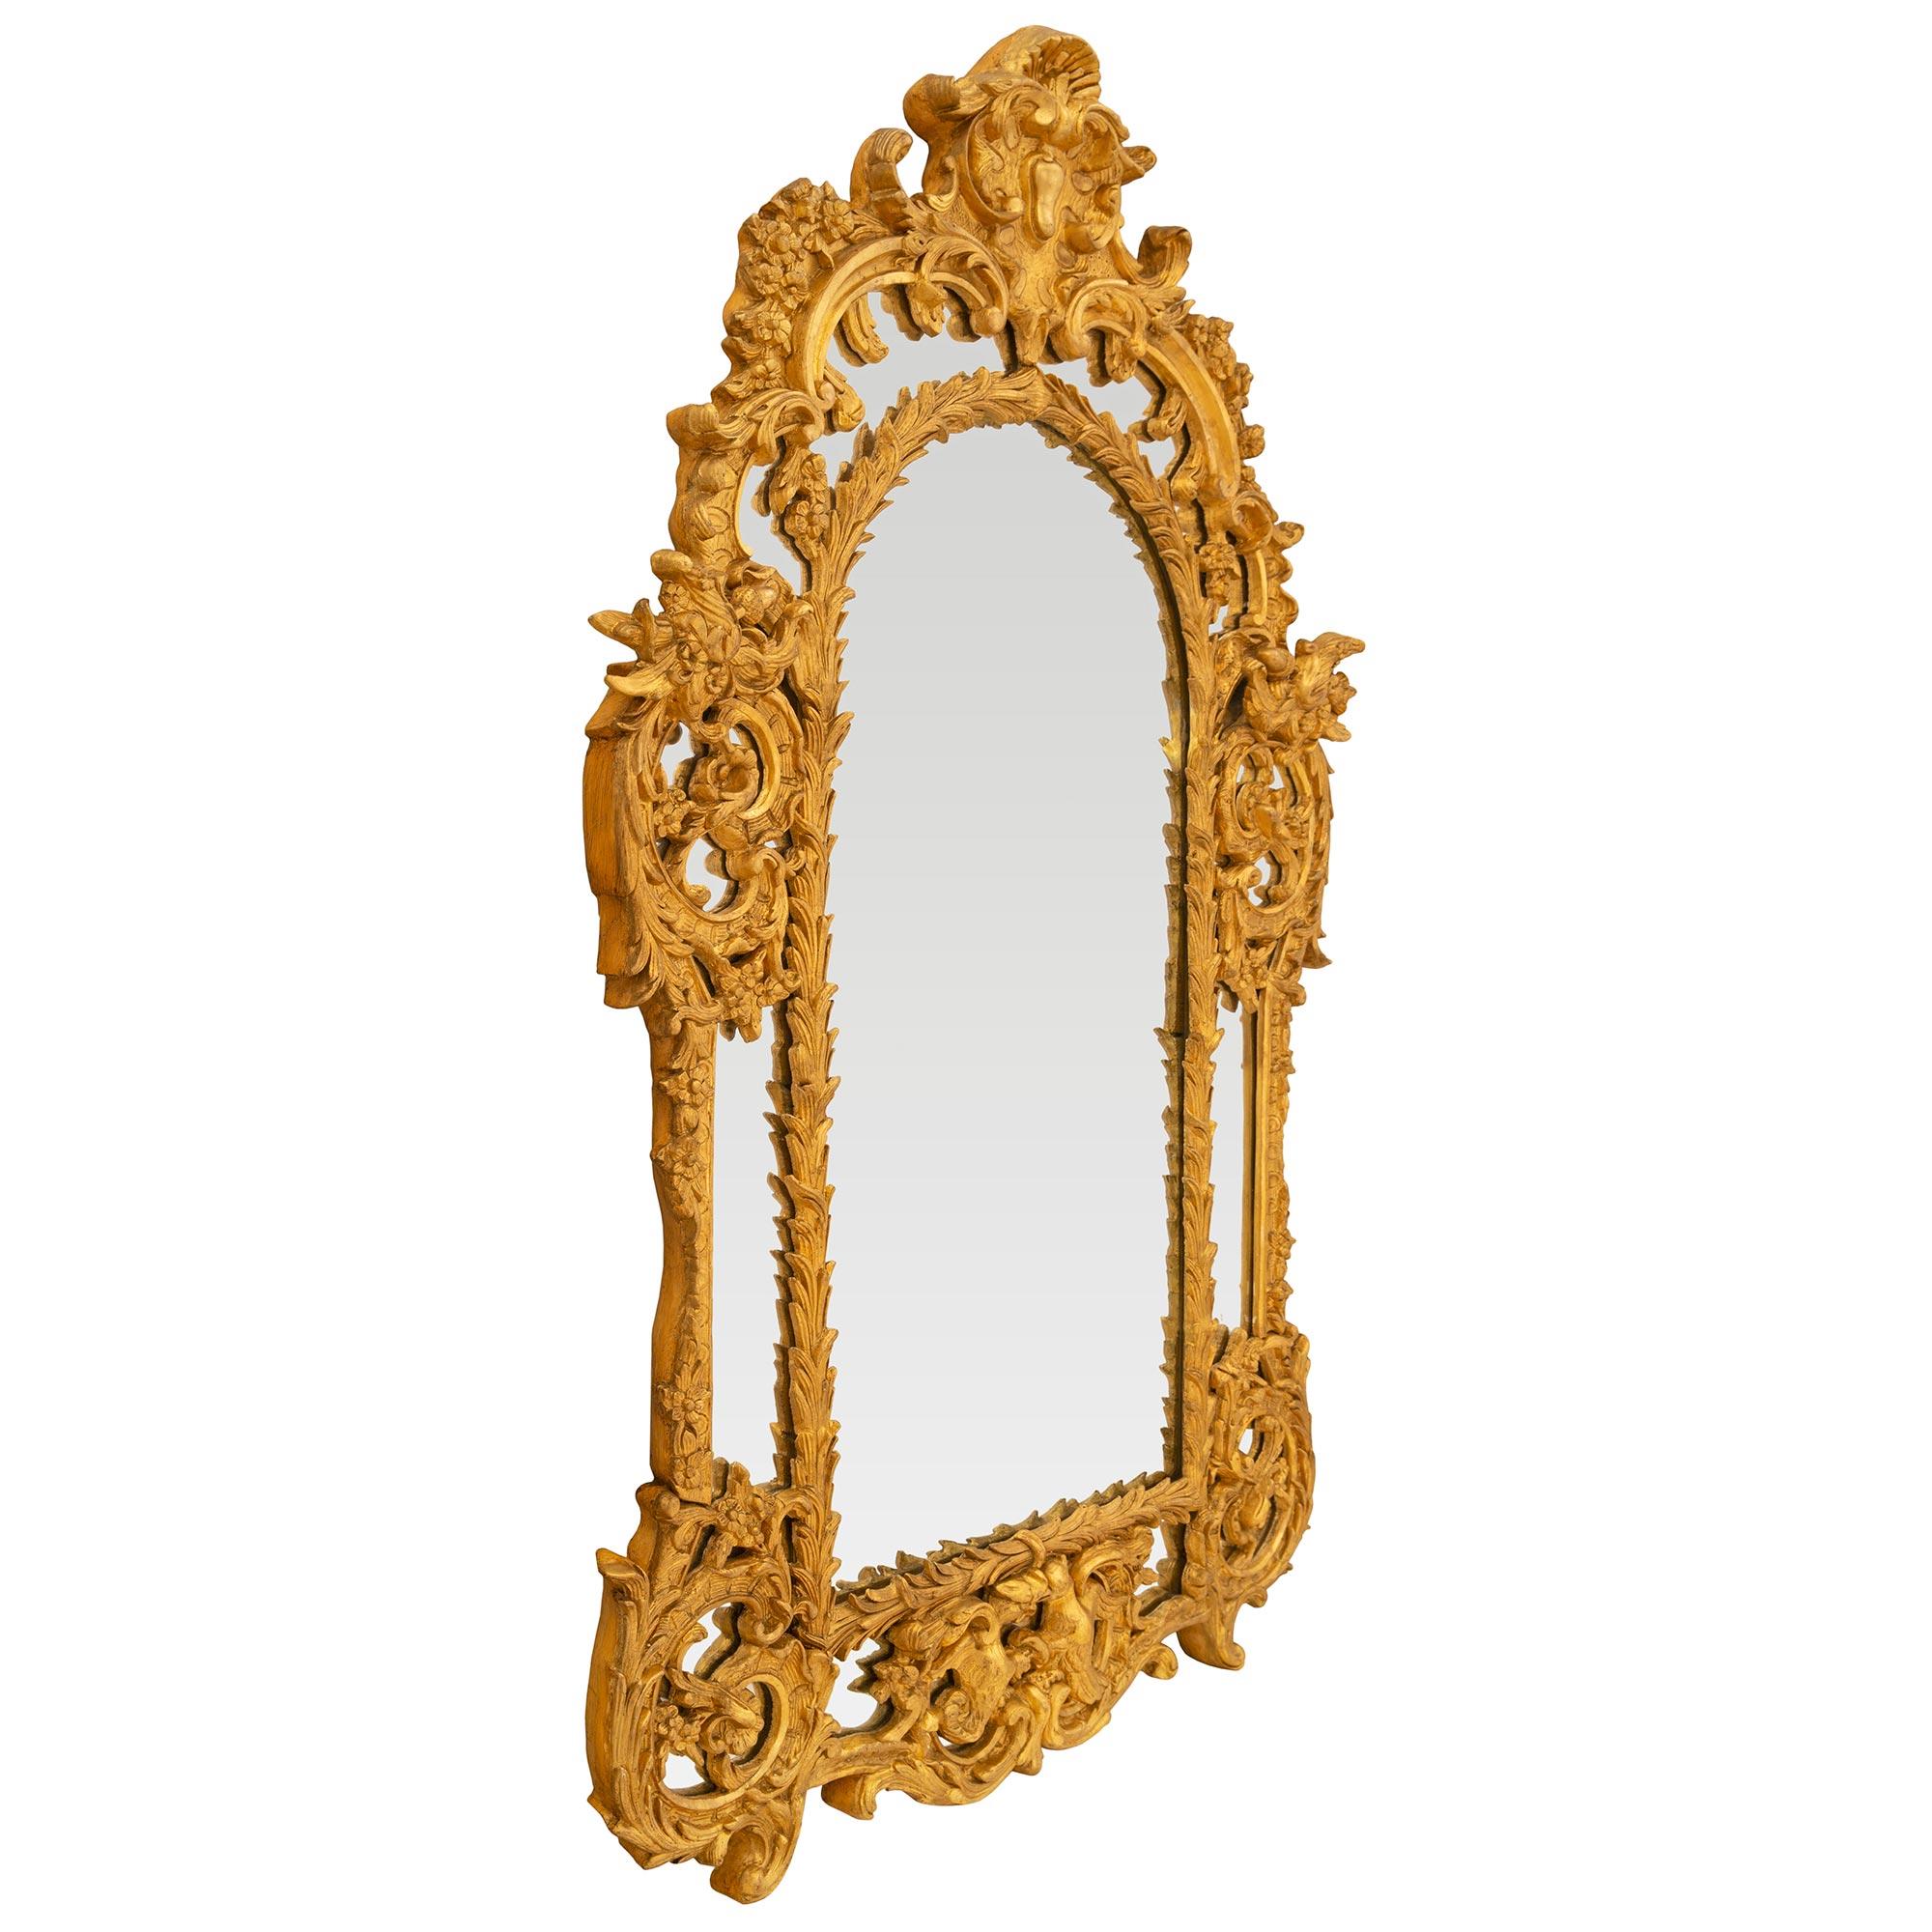 A beautiful Italian 19th century Regence st. double framed giltwood mirror. The mirror retains all of its original mirror plates throughout with the central mirror plate set within a richly carved wrap around foliate band. At the base are two birds